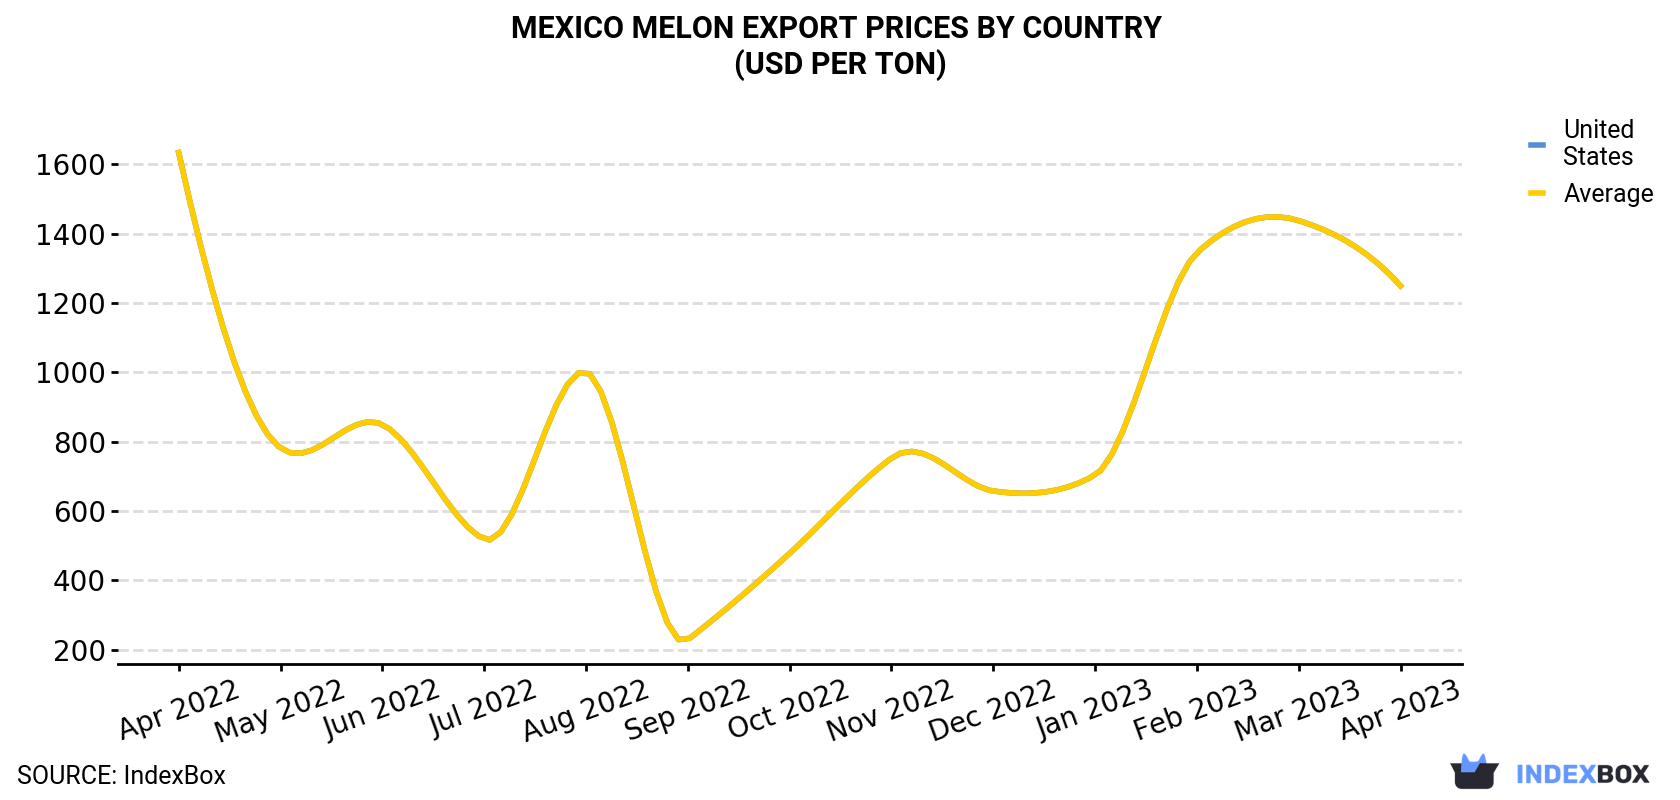 Mexico Melon Export Prices By Country (USD Per Ton)